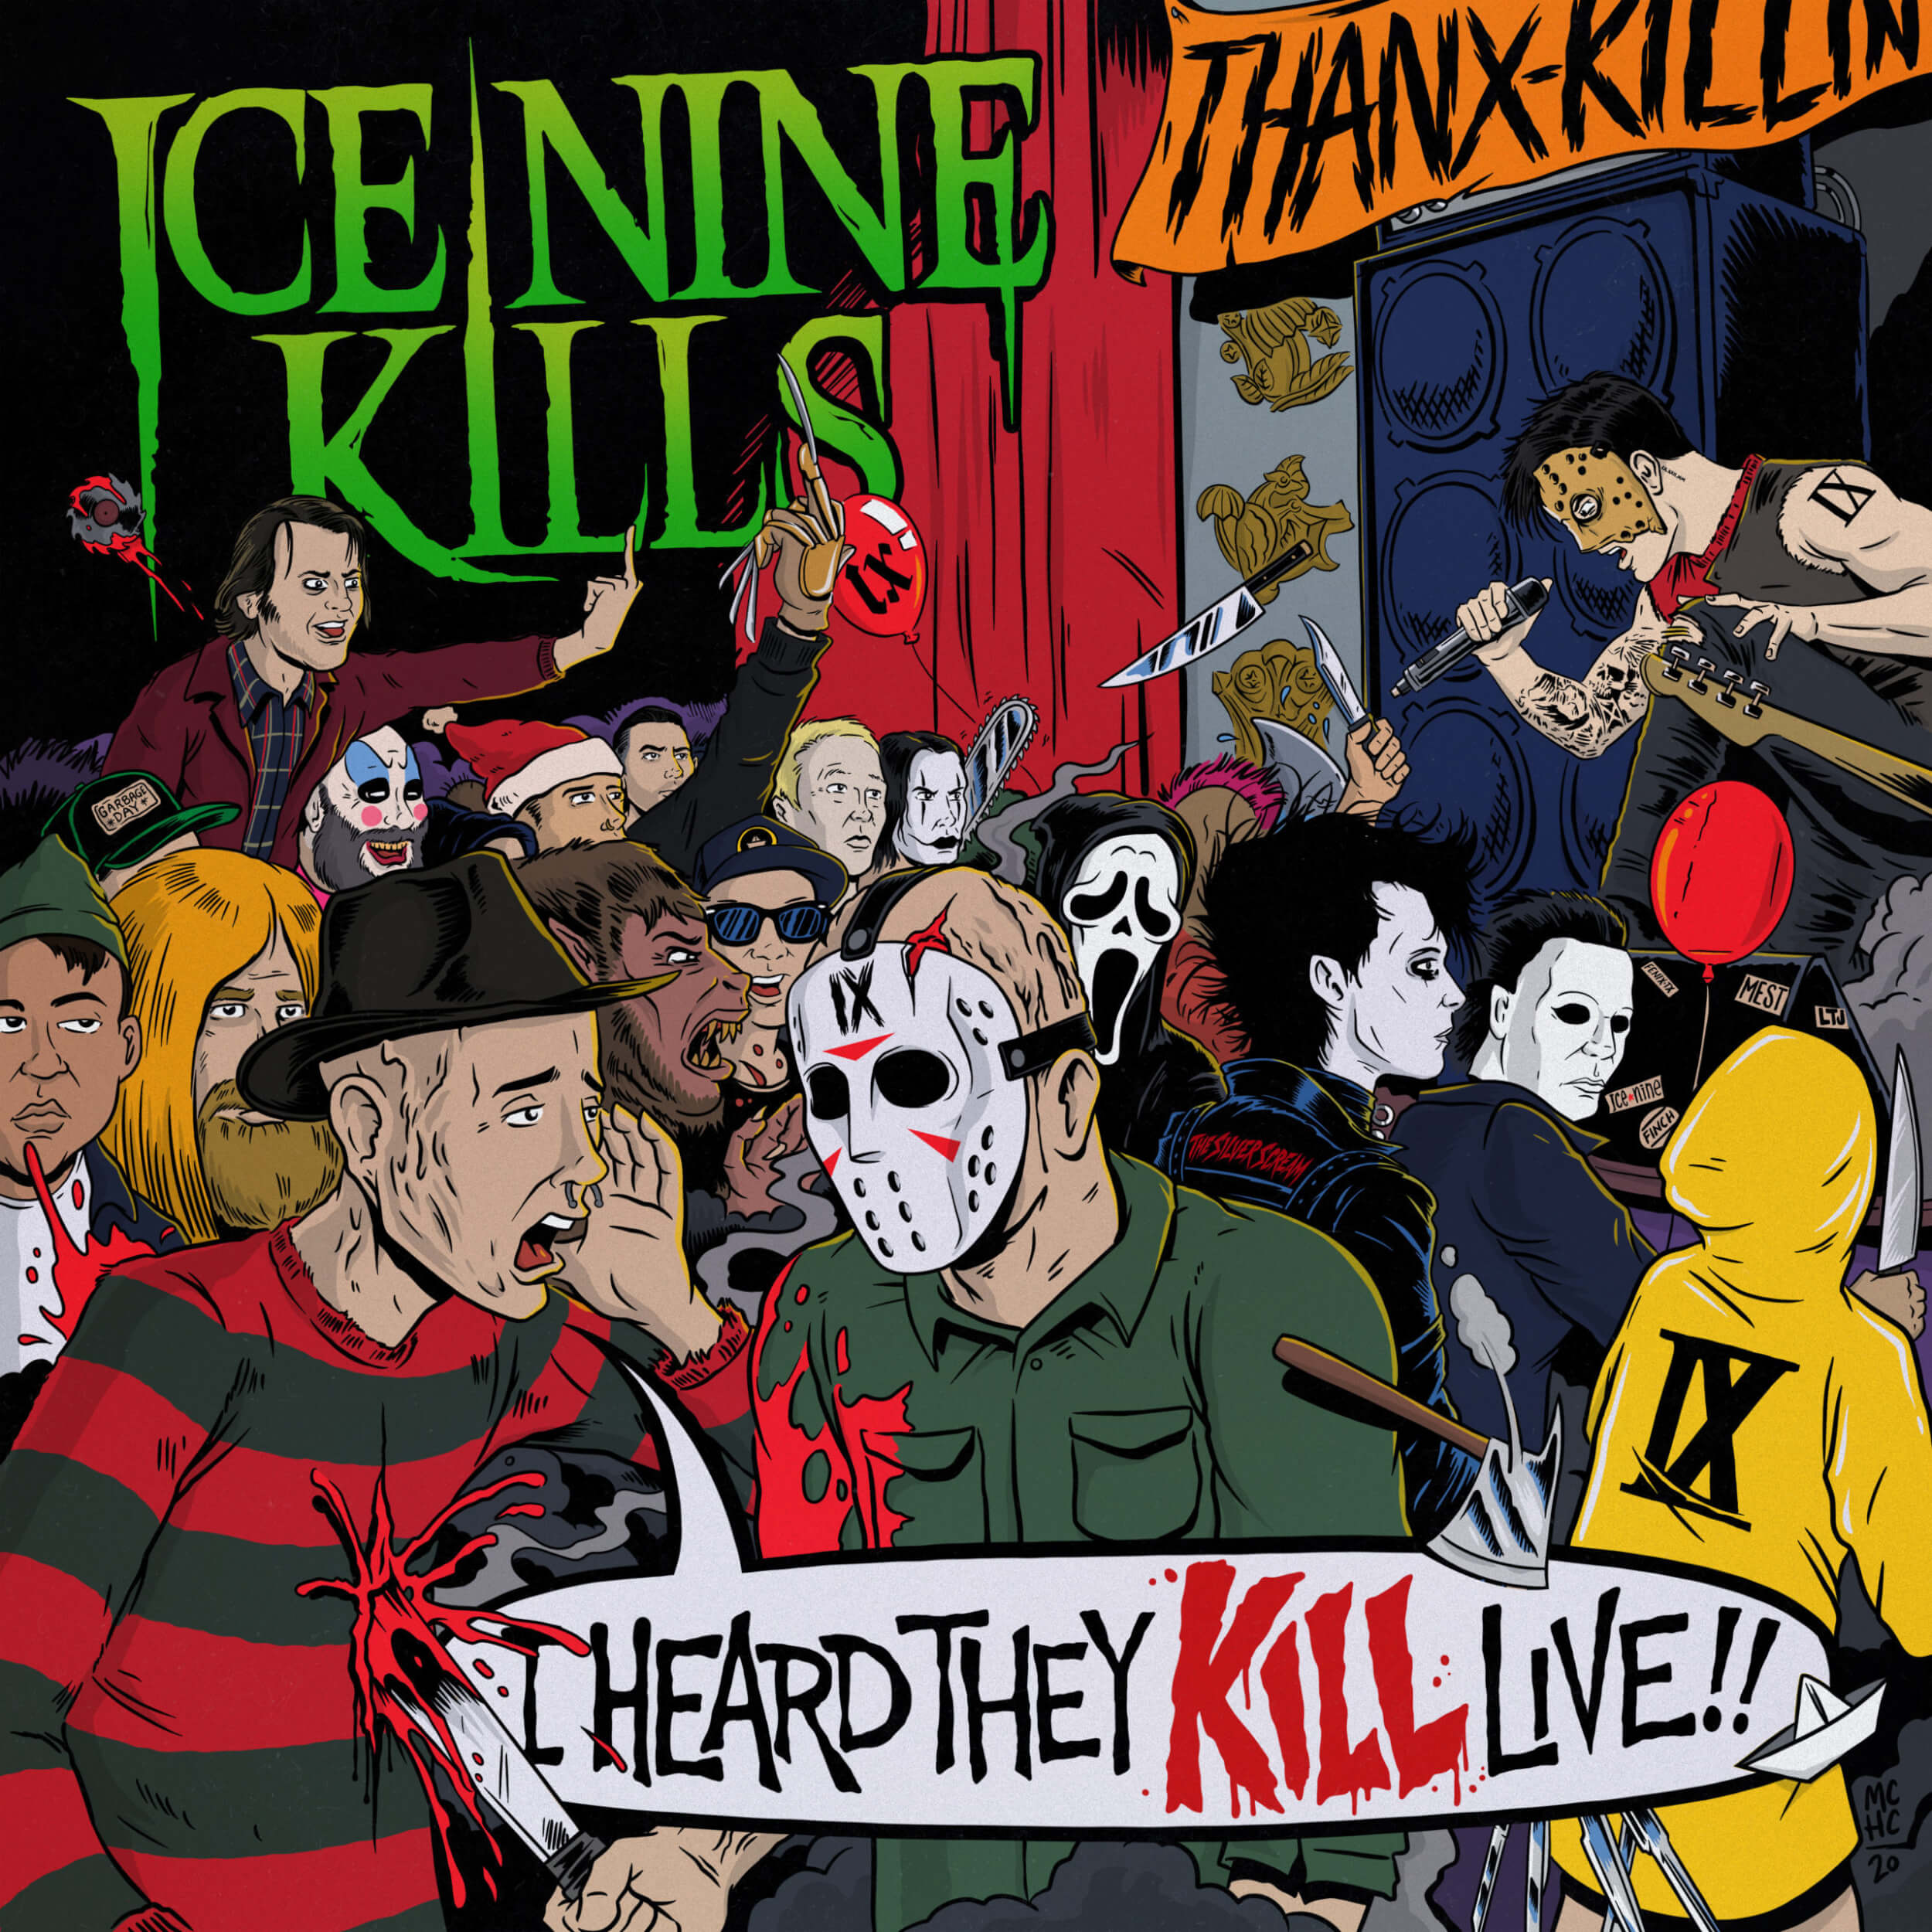 Featured image for “I Heard They KILL Live!!”